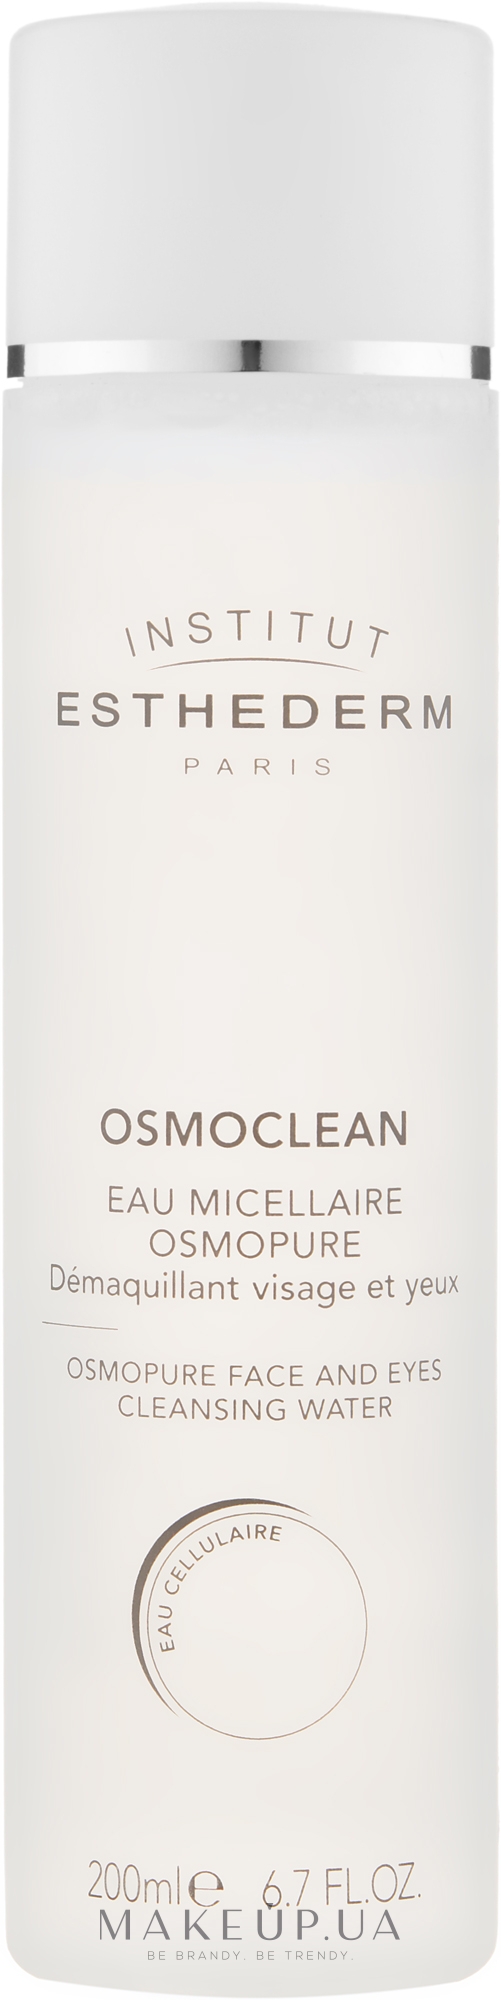 Мицеллярная вода - Institut Esthederm Osmoclean Osmopure Face and Eyes Cleansing Water — фото 200ml